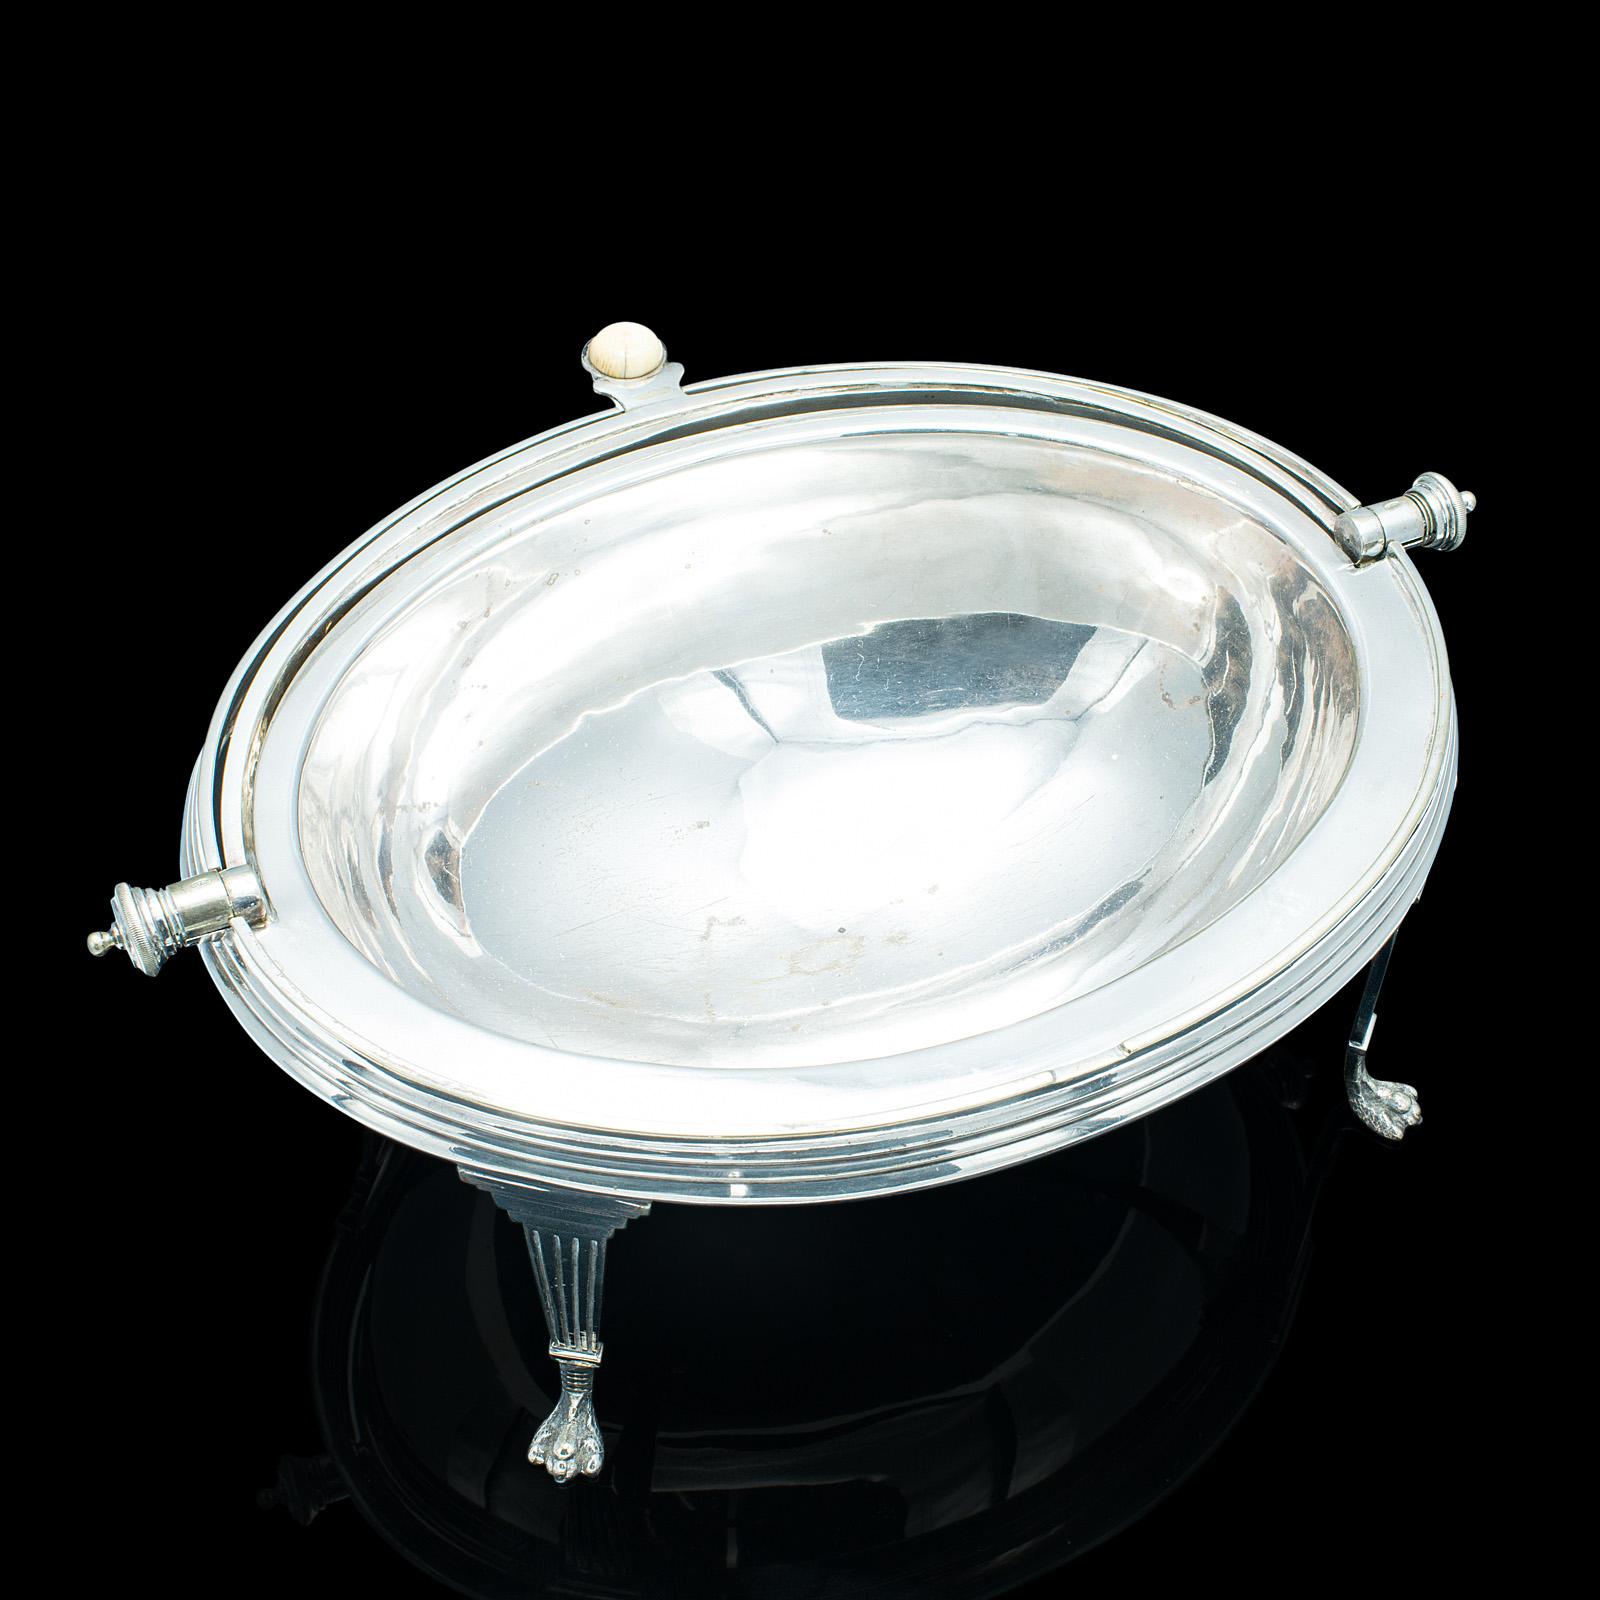 Antique Roll-Over Serving Dish, English, Silver Plate, Dome Top Tureen, Server For Sale 2